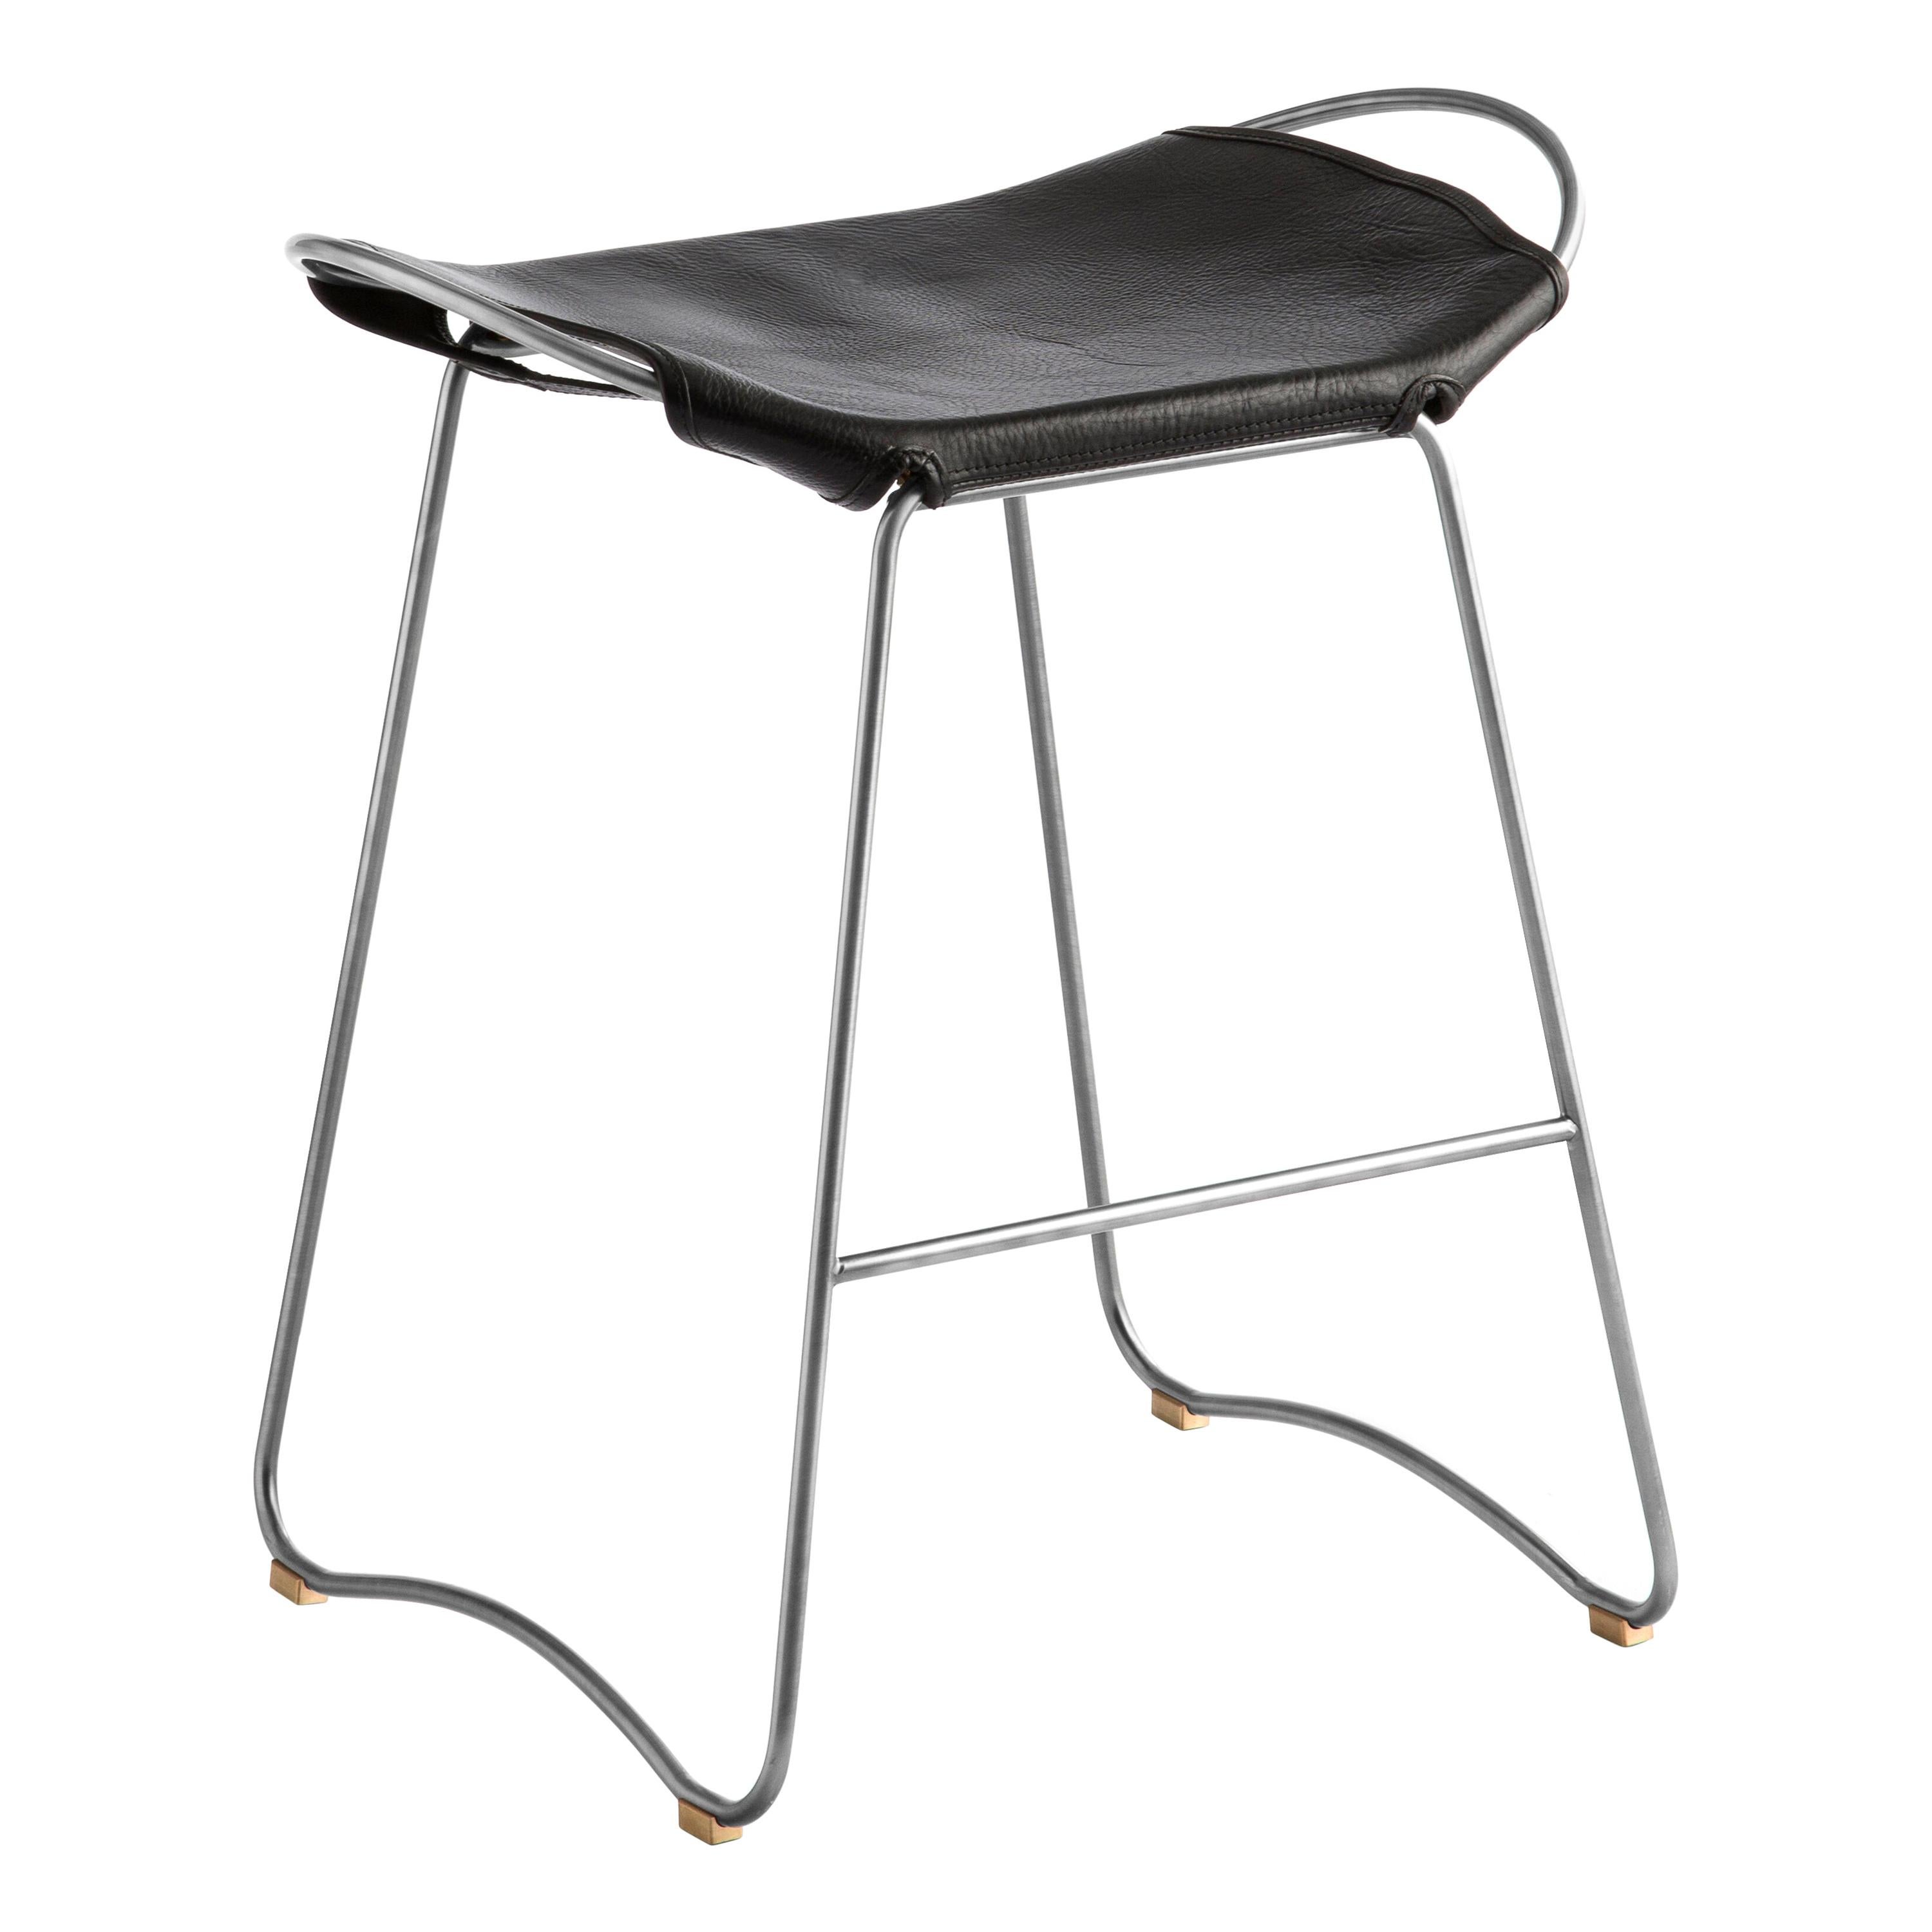 Sculptural Organic Contemporary Bar Stool Old Silver Metal & Black Leather 